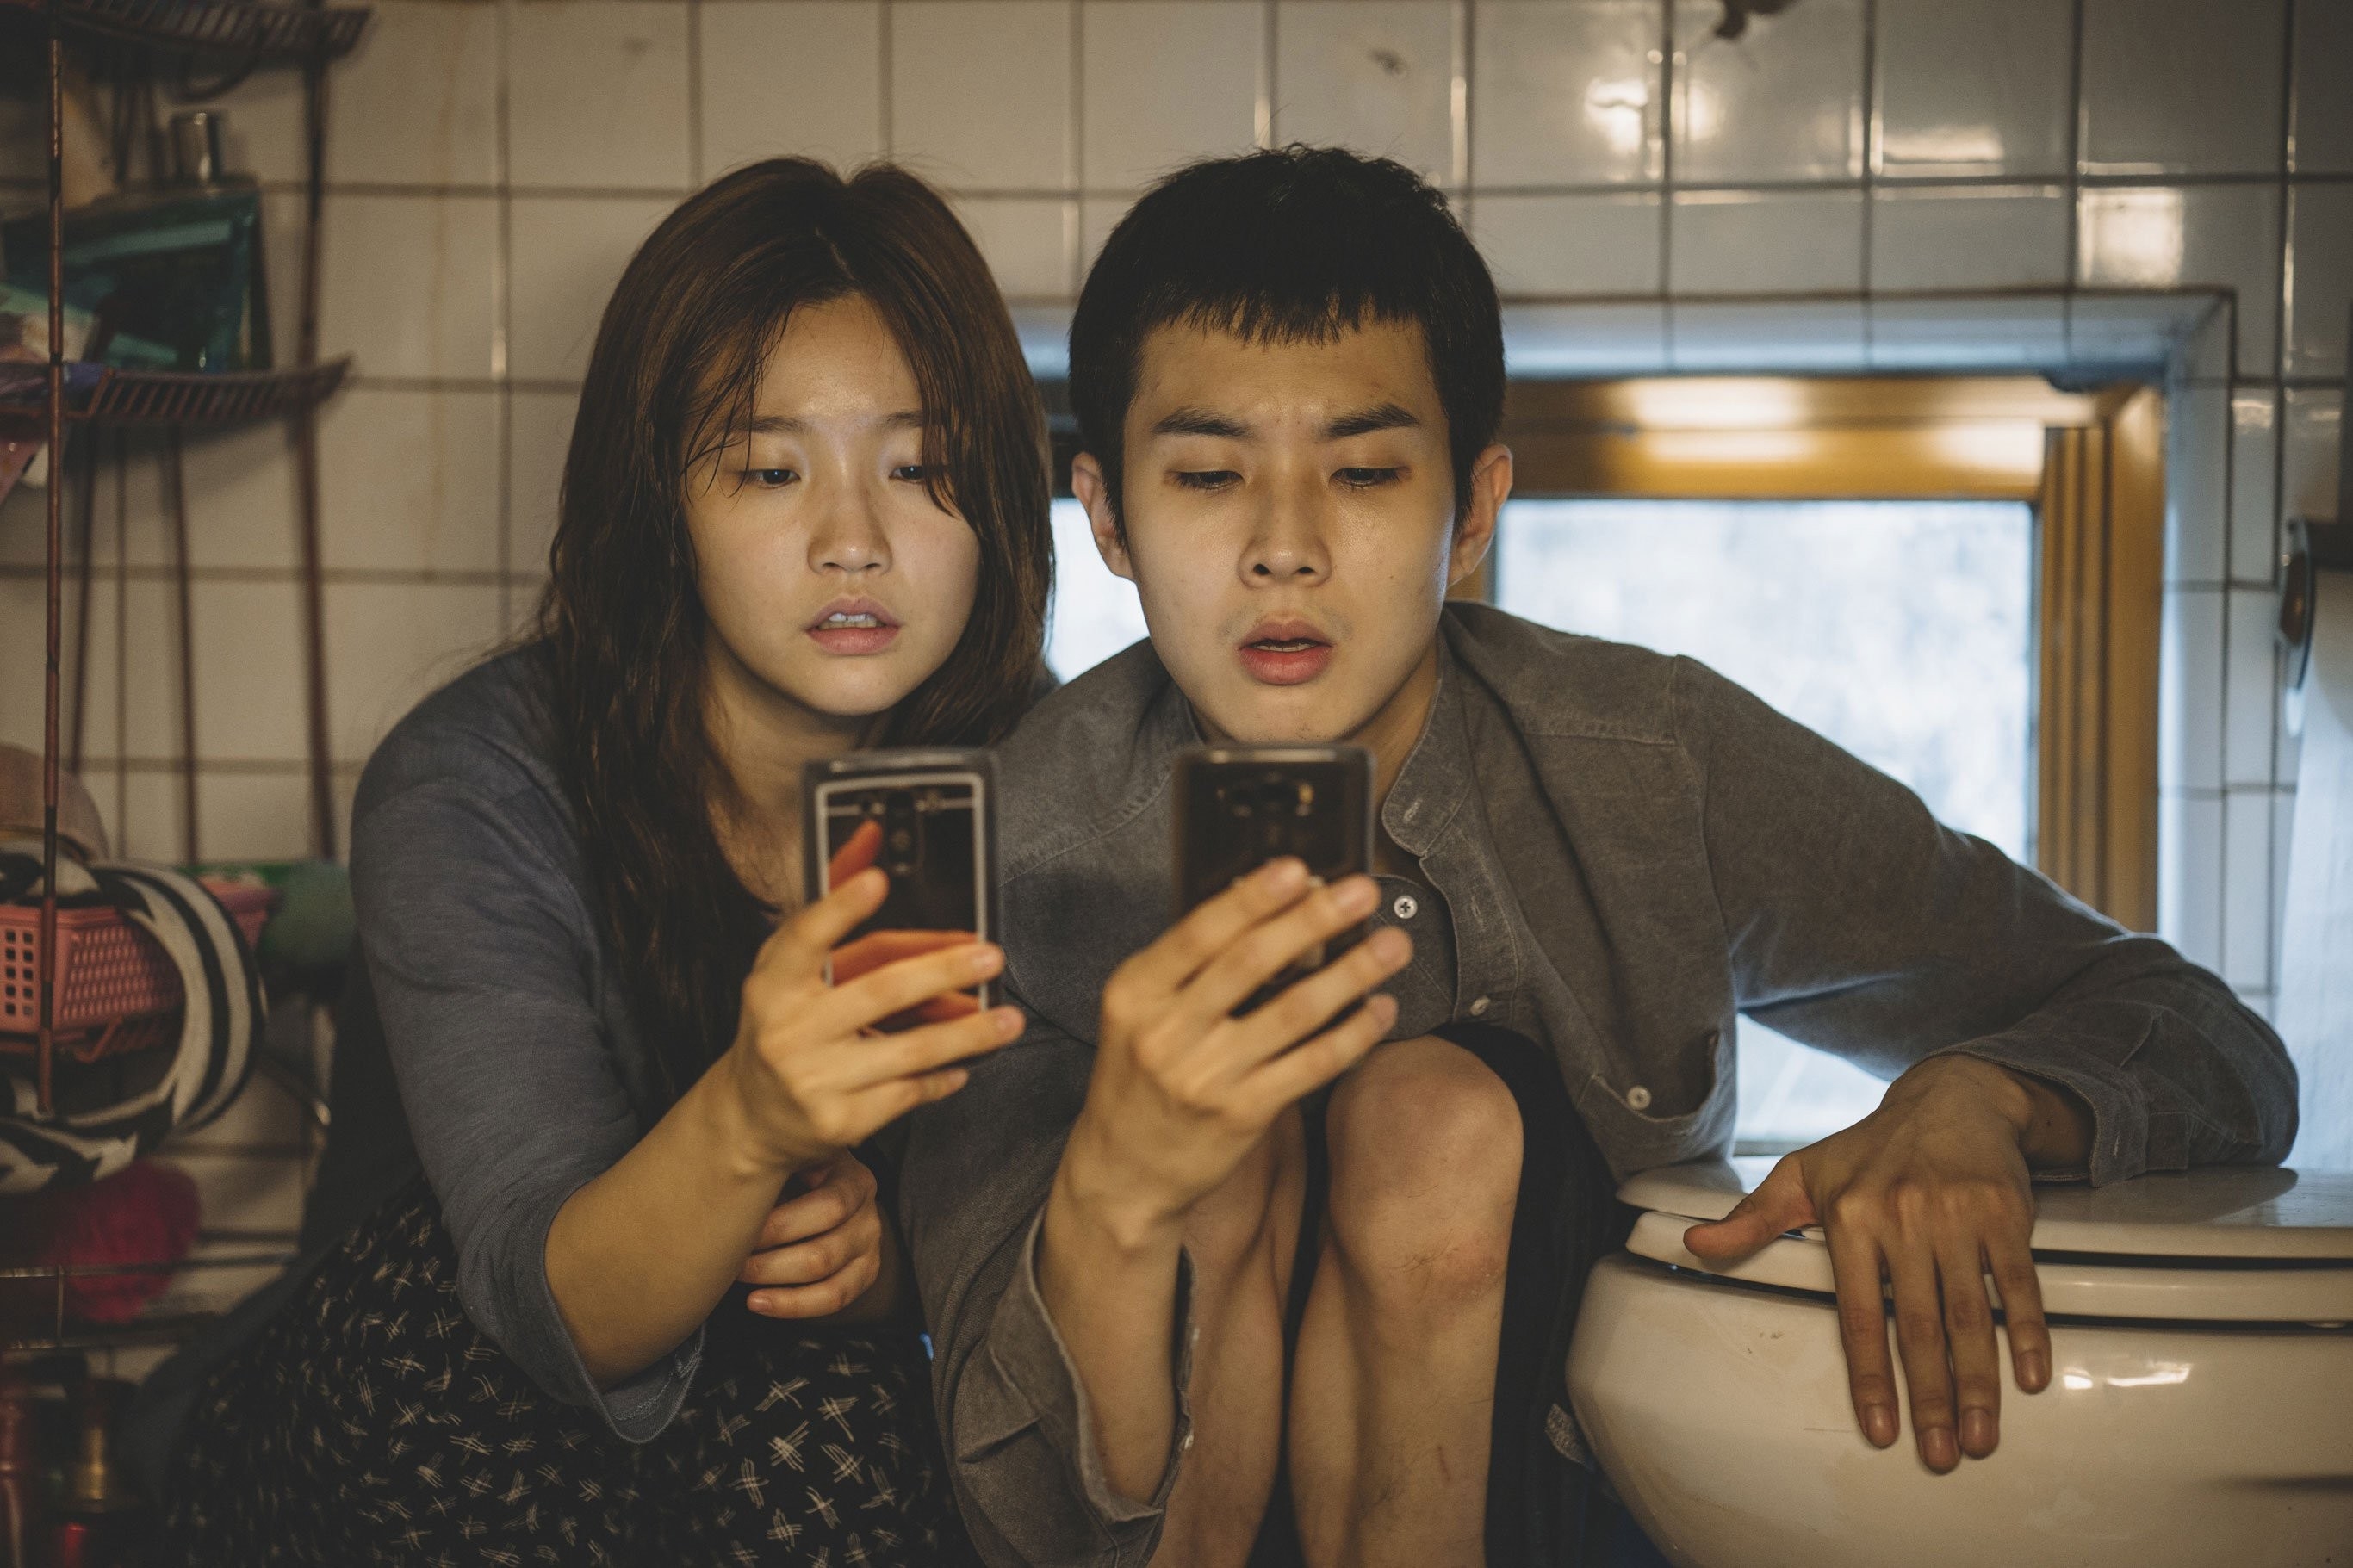 Park So-dam and Choi Woo-sik looking at their phone